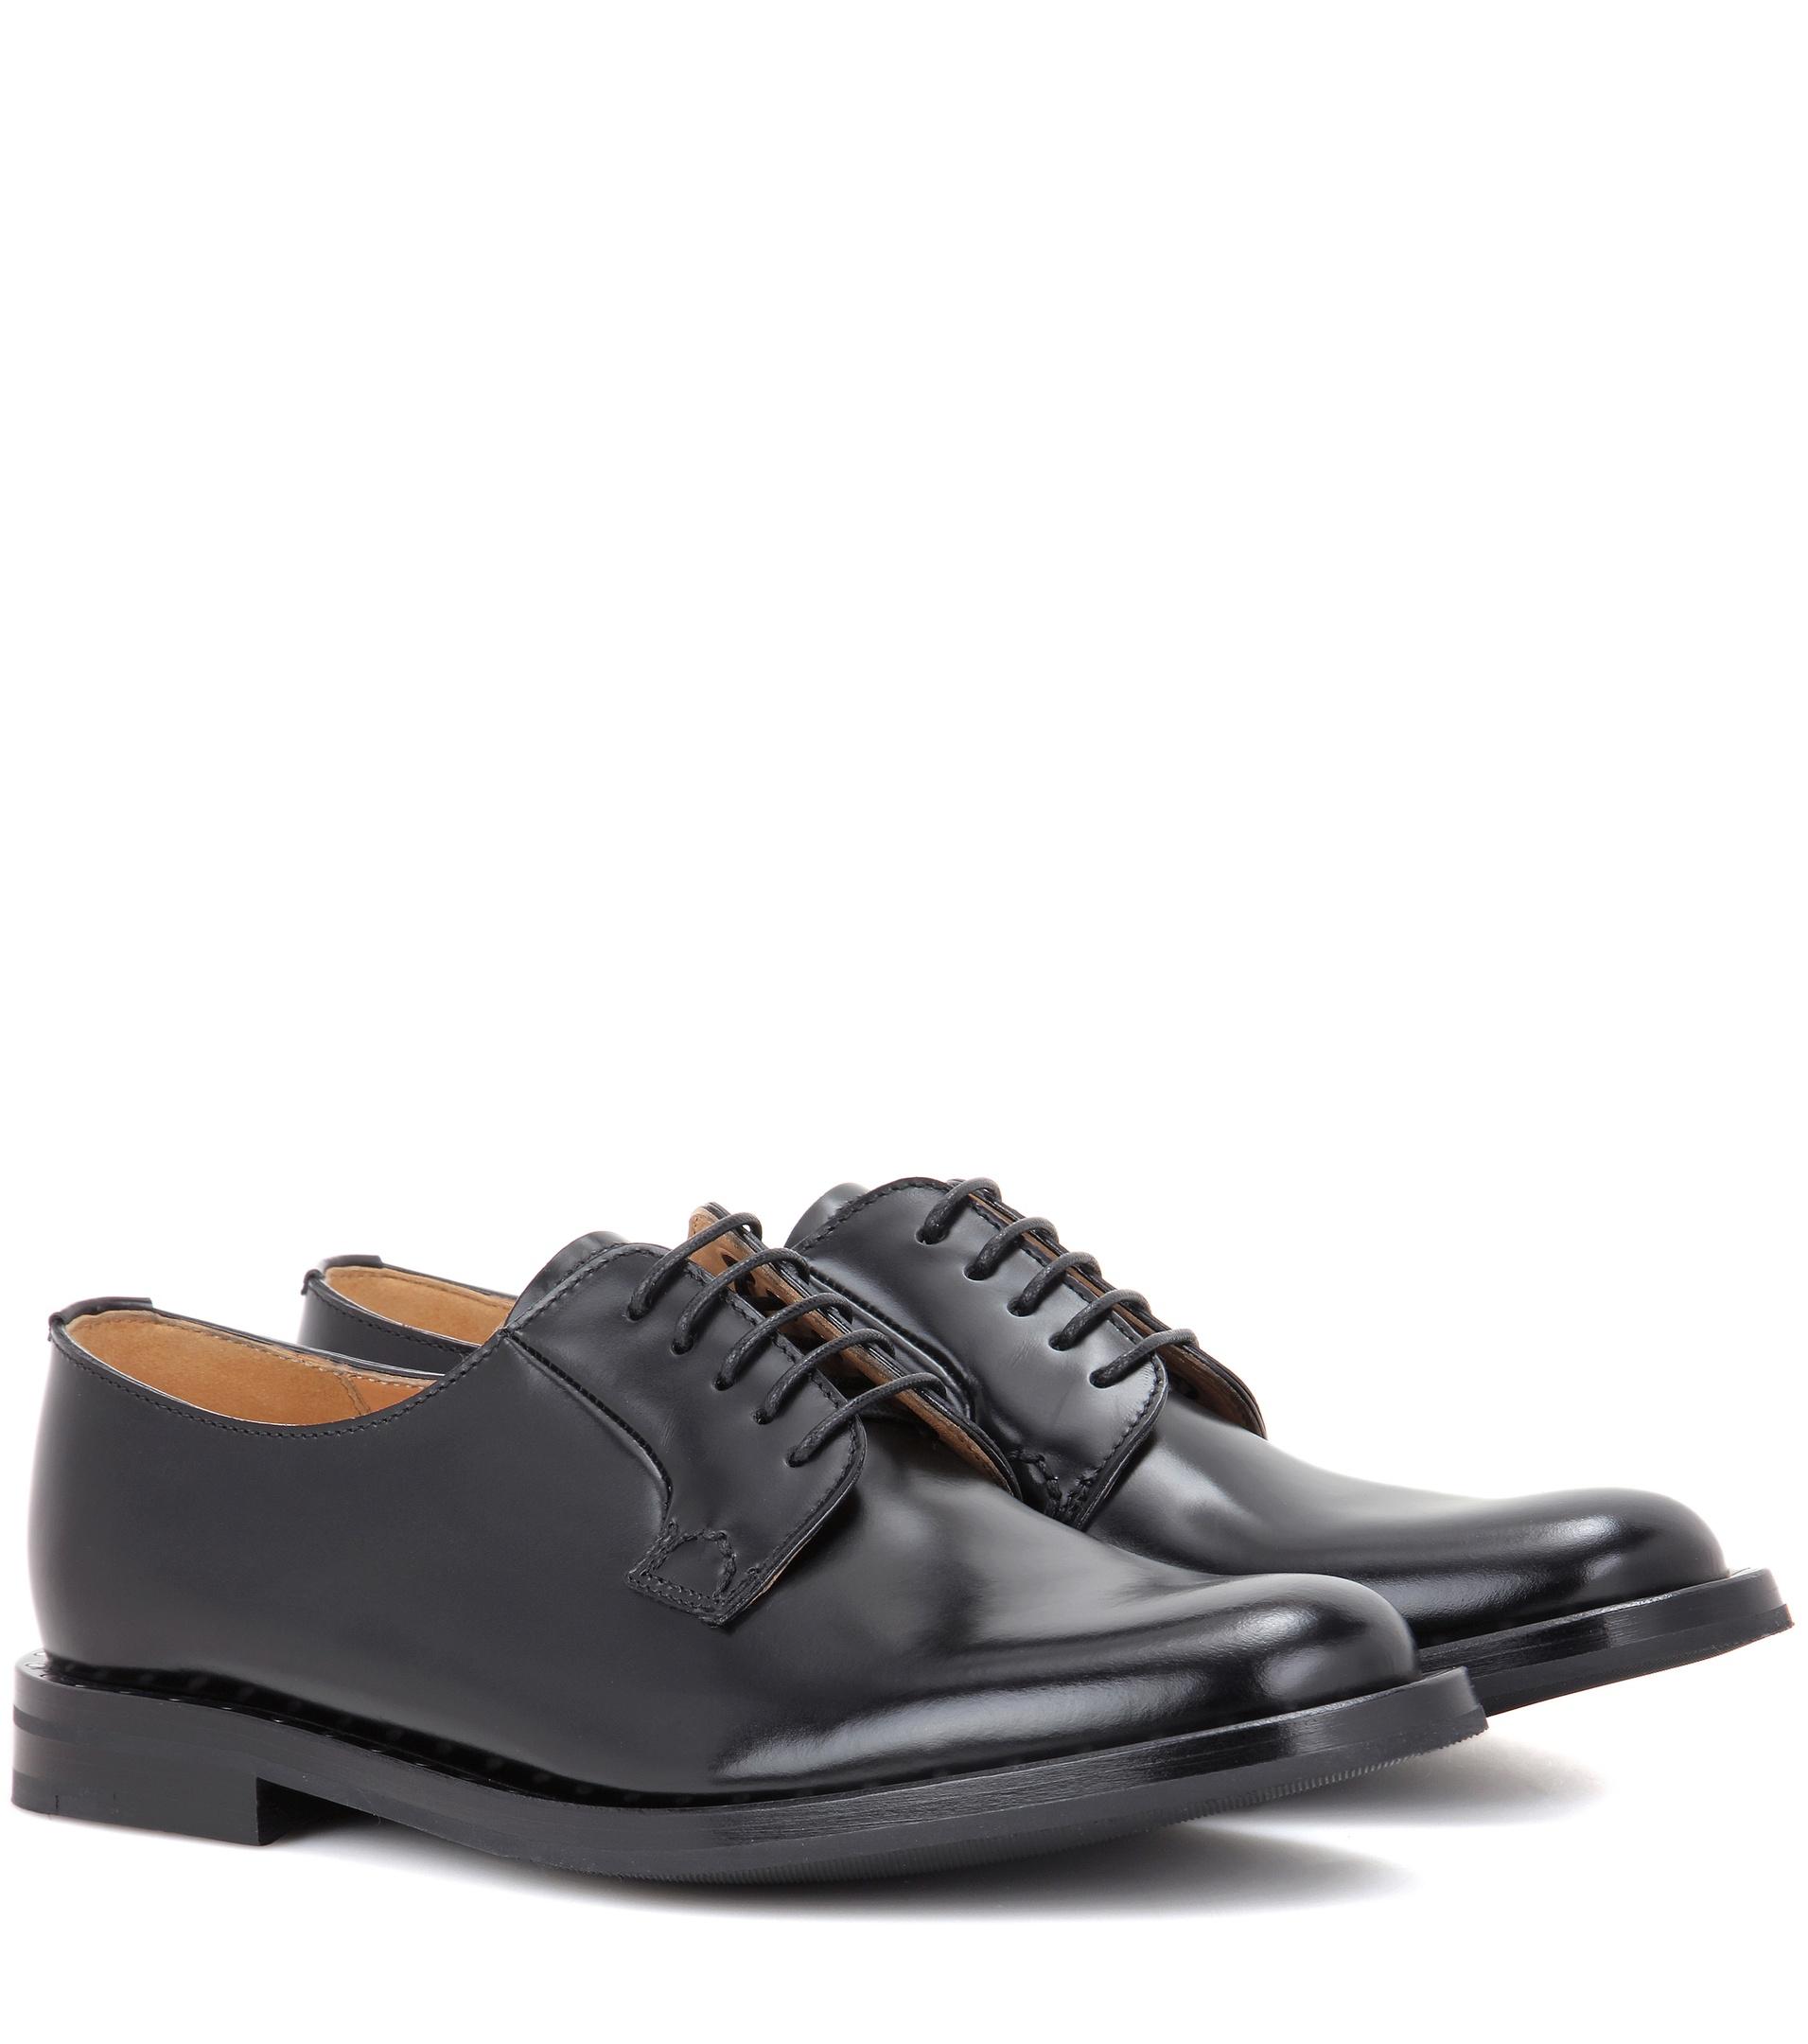 Lyst - Church's Leather Derby Shoes in Black